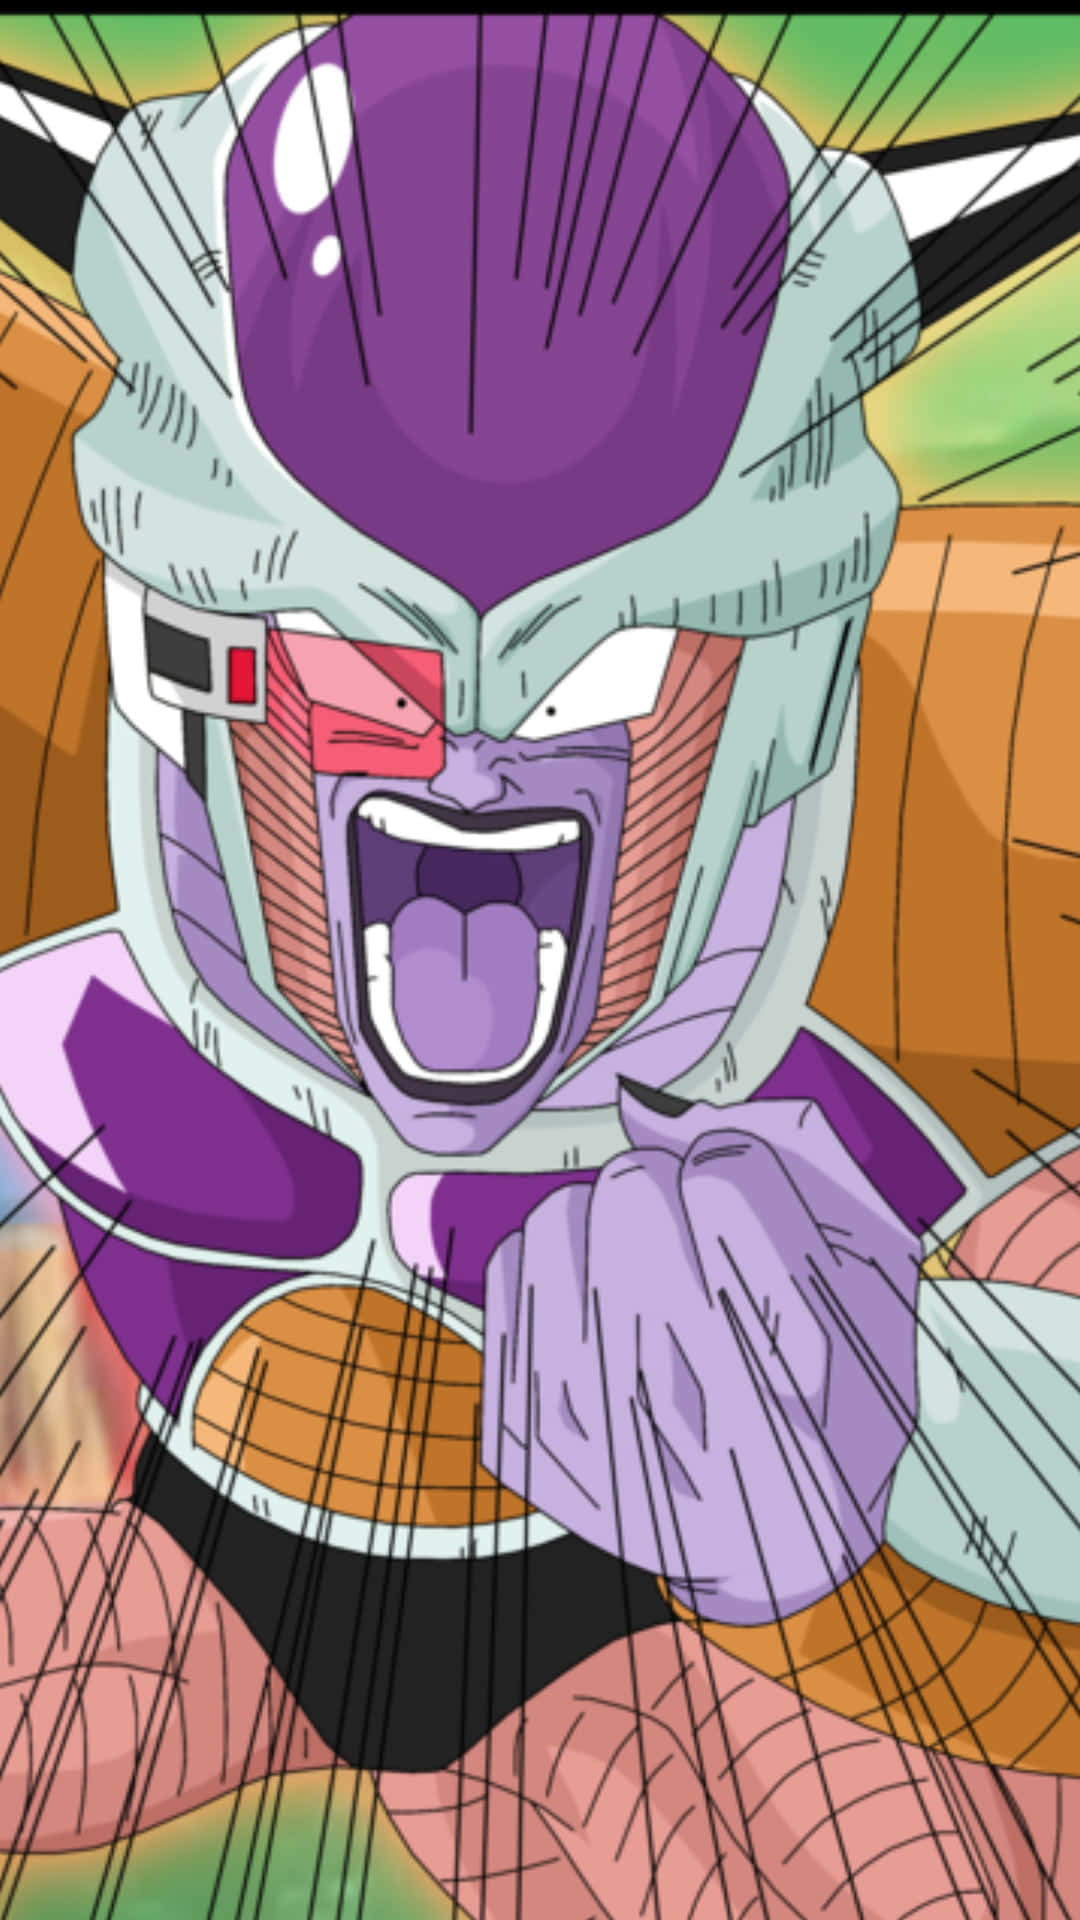 Frieza's Army stands ready to serve their master Wallpaper